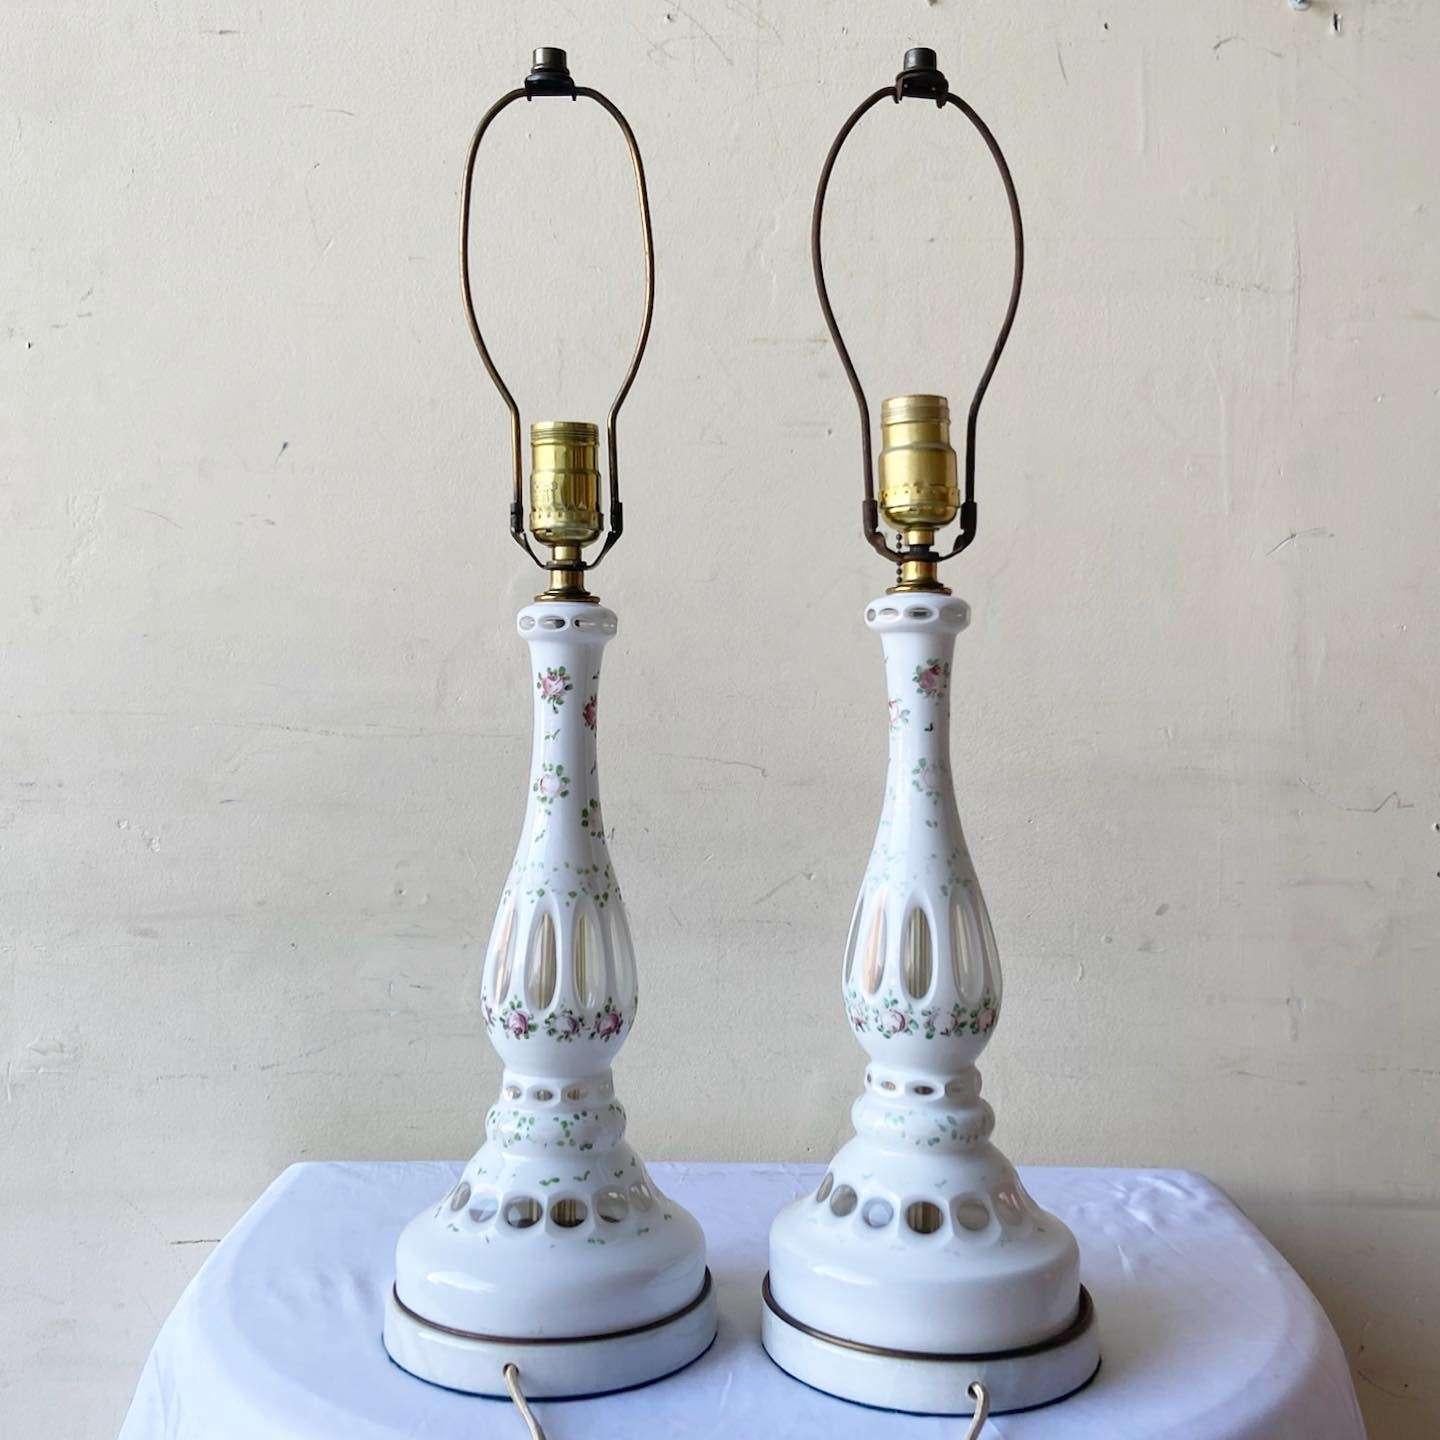 Vintage Sculpted Porcelain Table Lamps In Good Condition For Sale In Delray Beach, FL